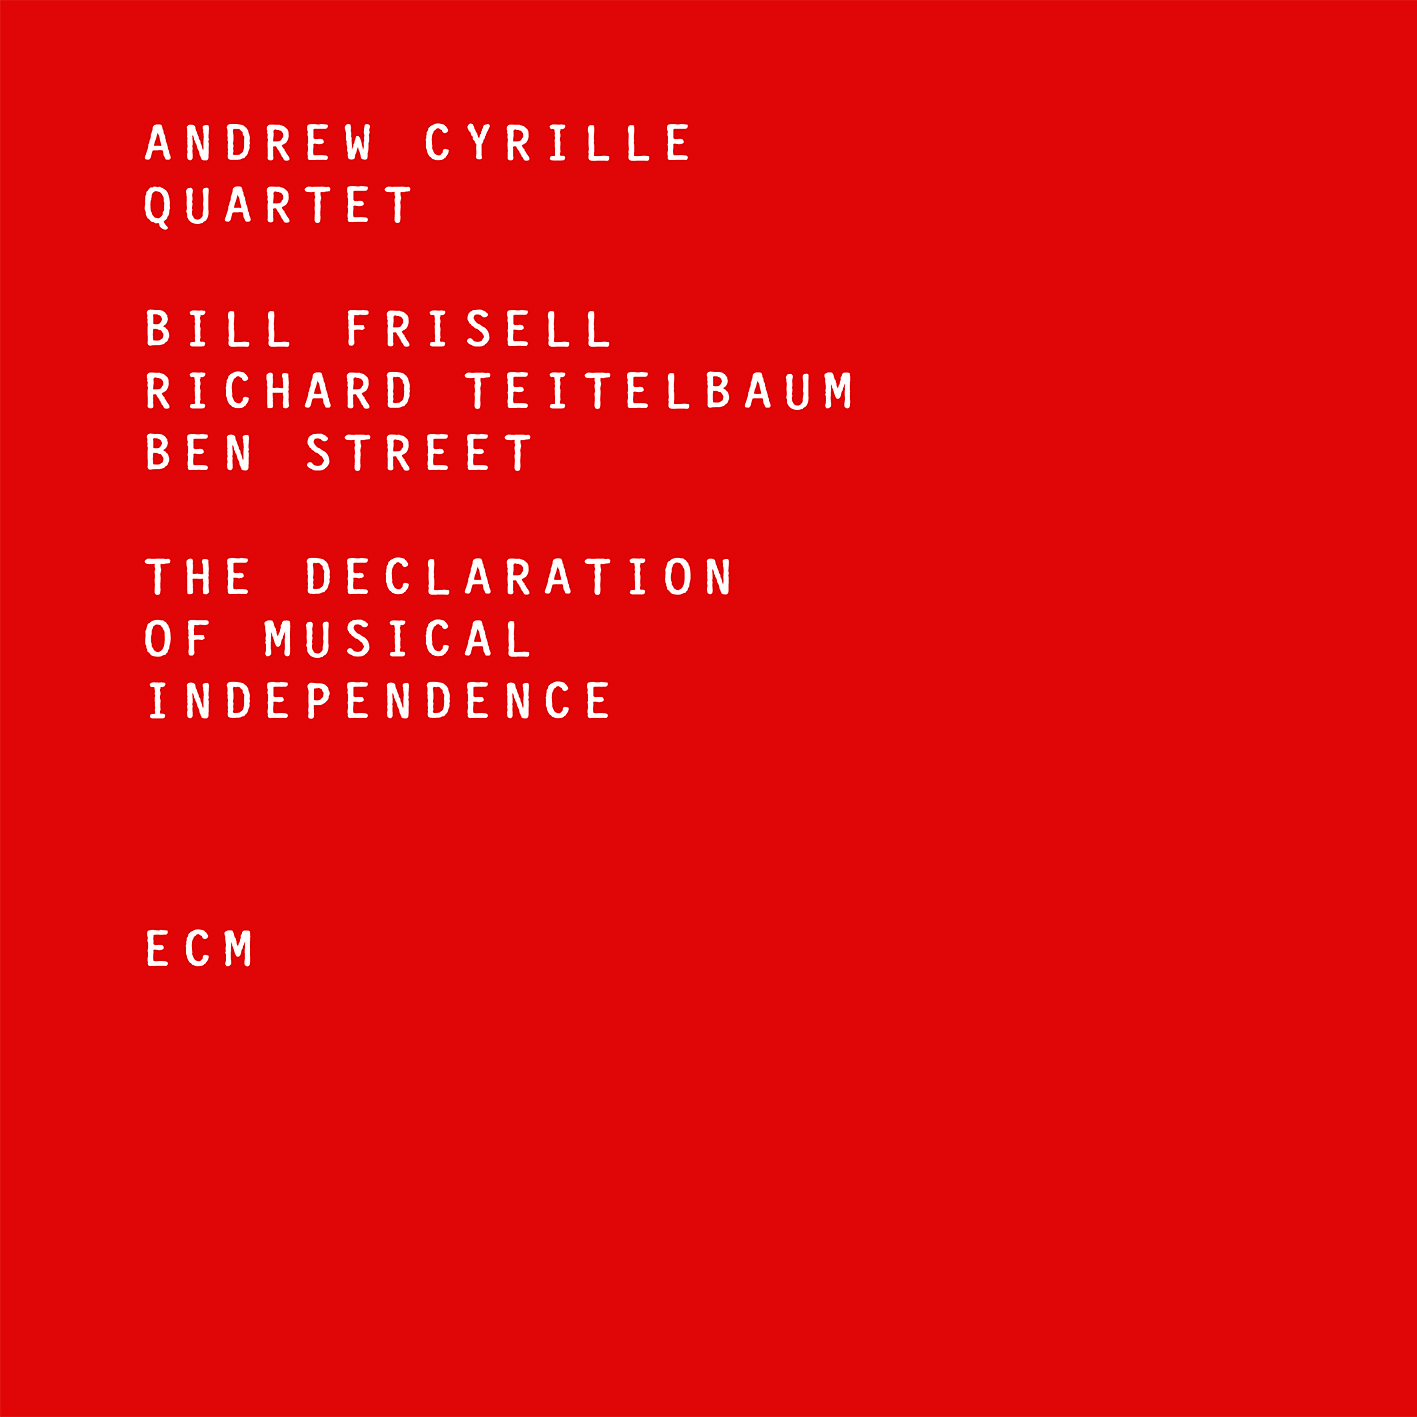 Andrew Cyrille Quartet - The Declaration Of Musical Independence (2016) [HDTracks FLAC 24bit/96kHz]